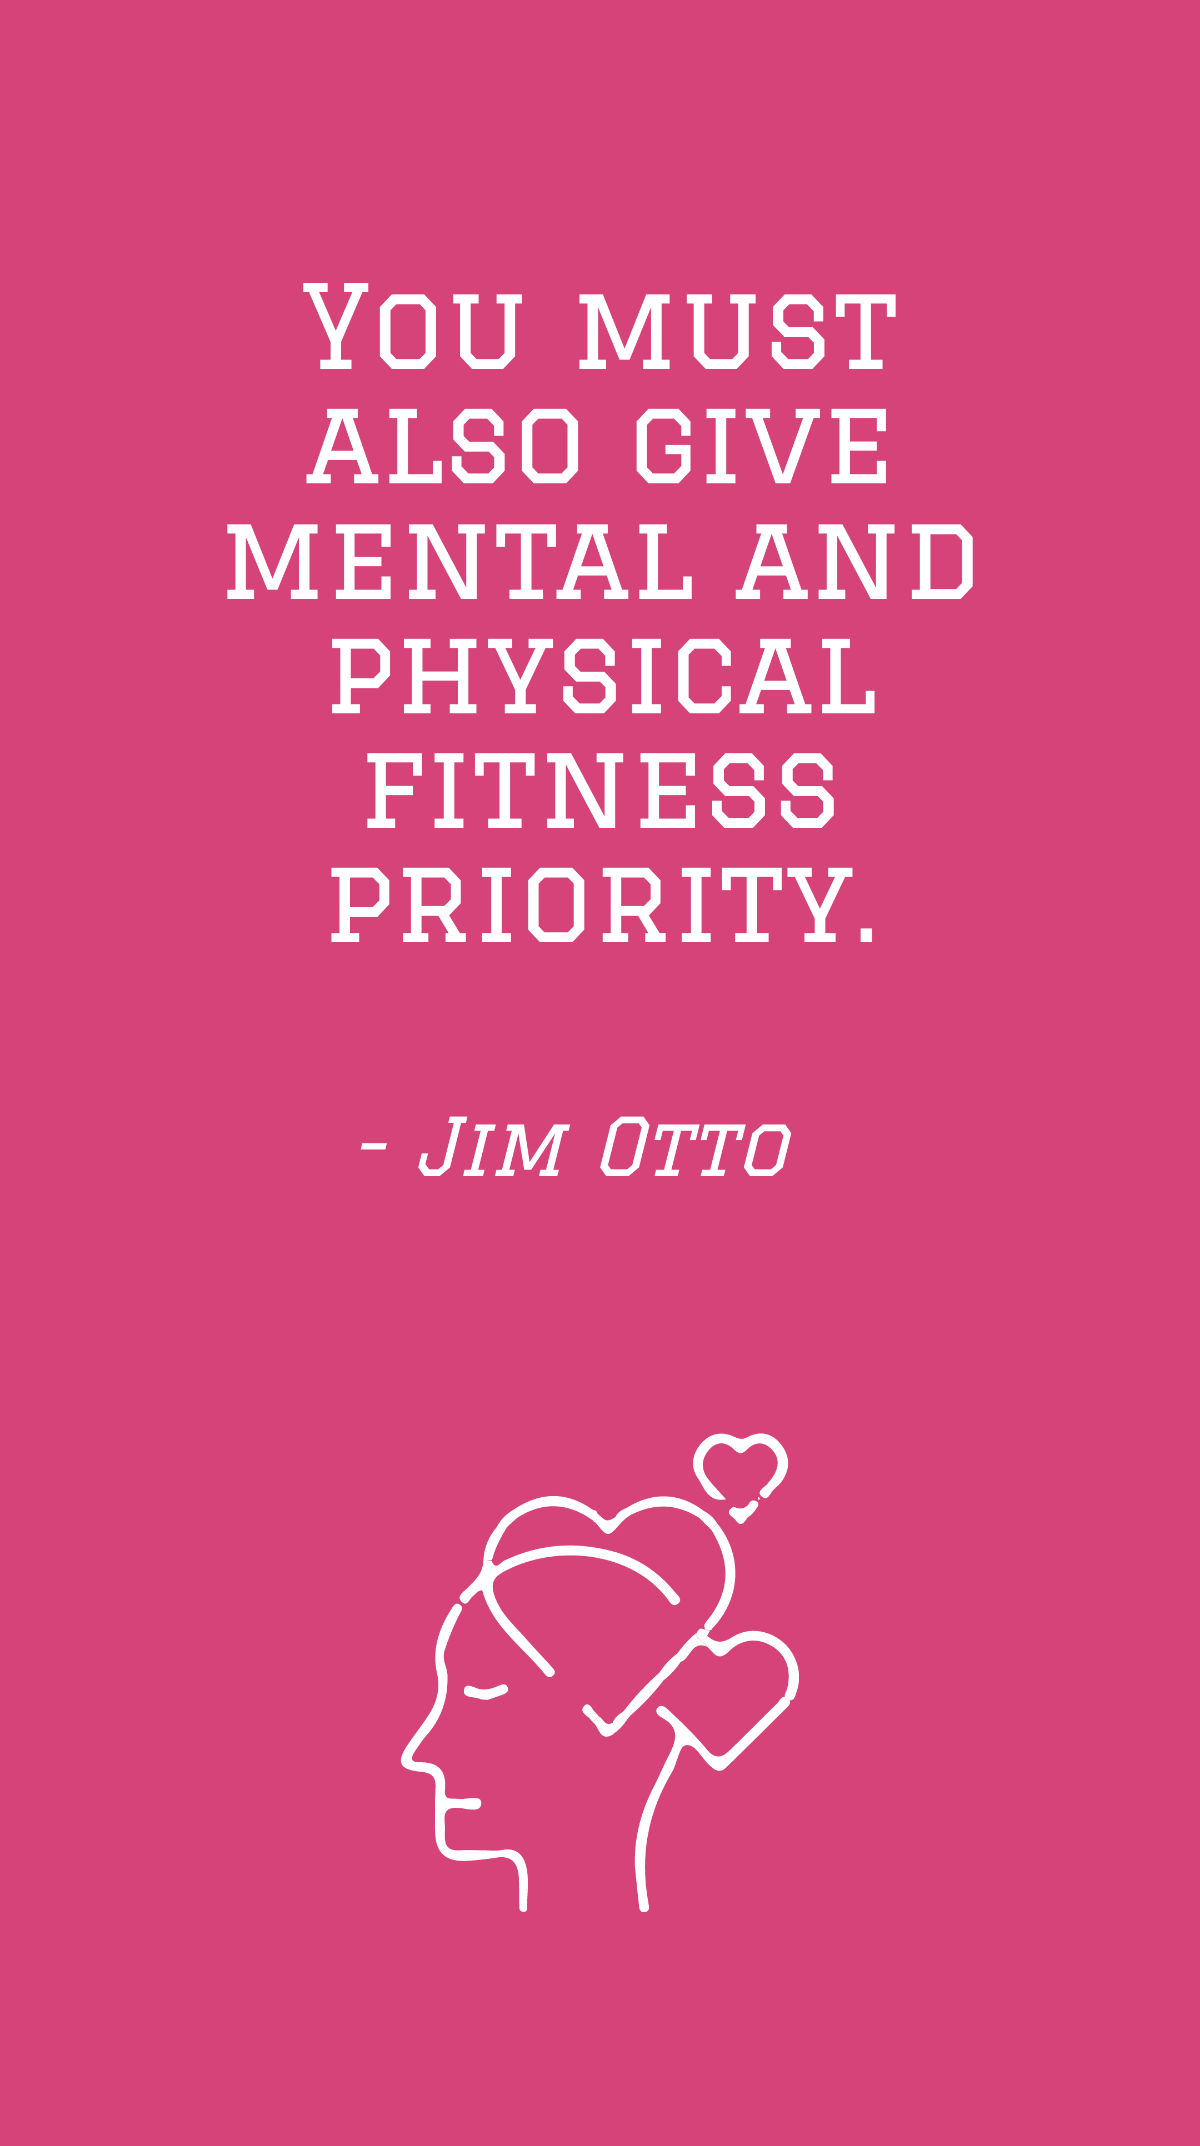 Jim Otto - You must also give mental and physical fitness priority. Template